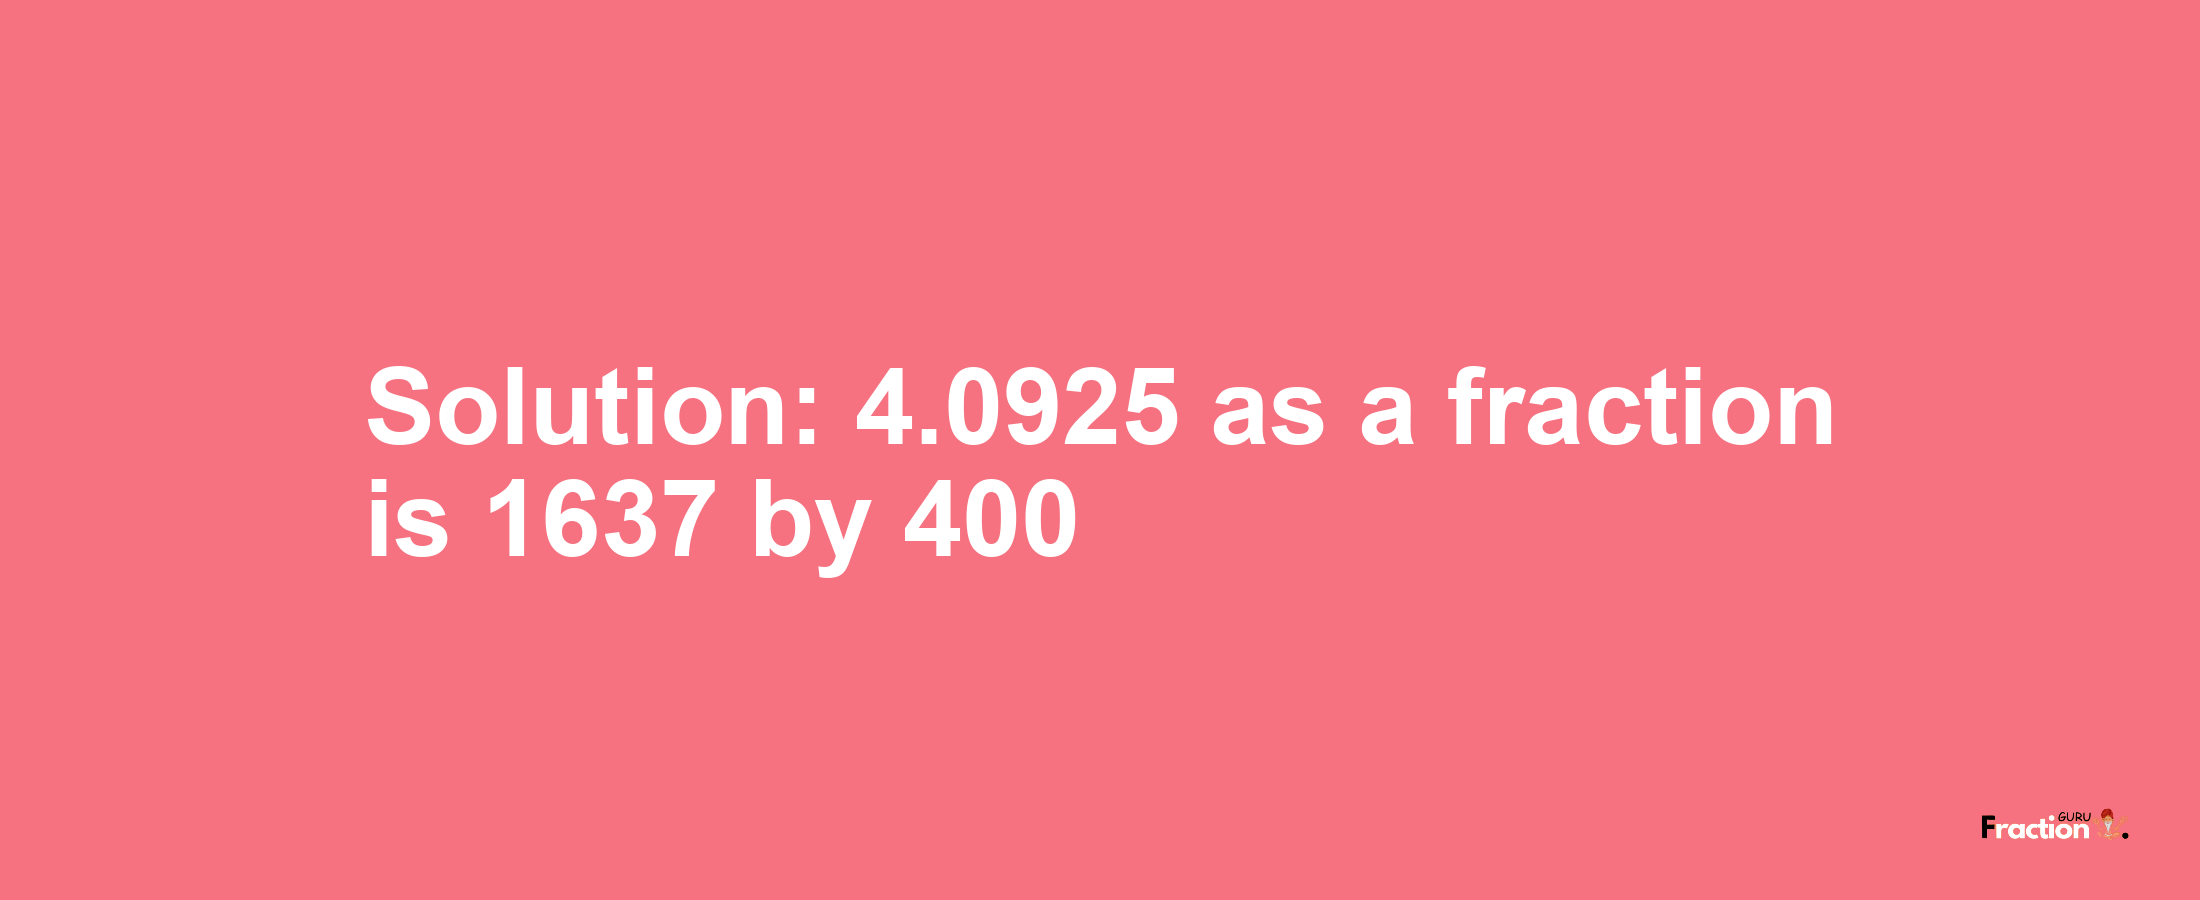 Solution:4.0925 as a fraction is 1637/400